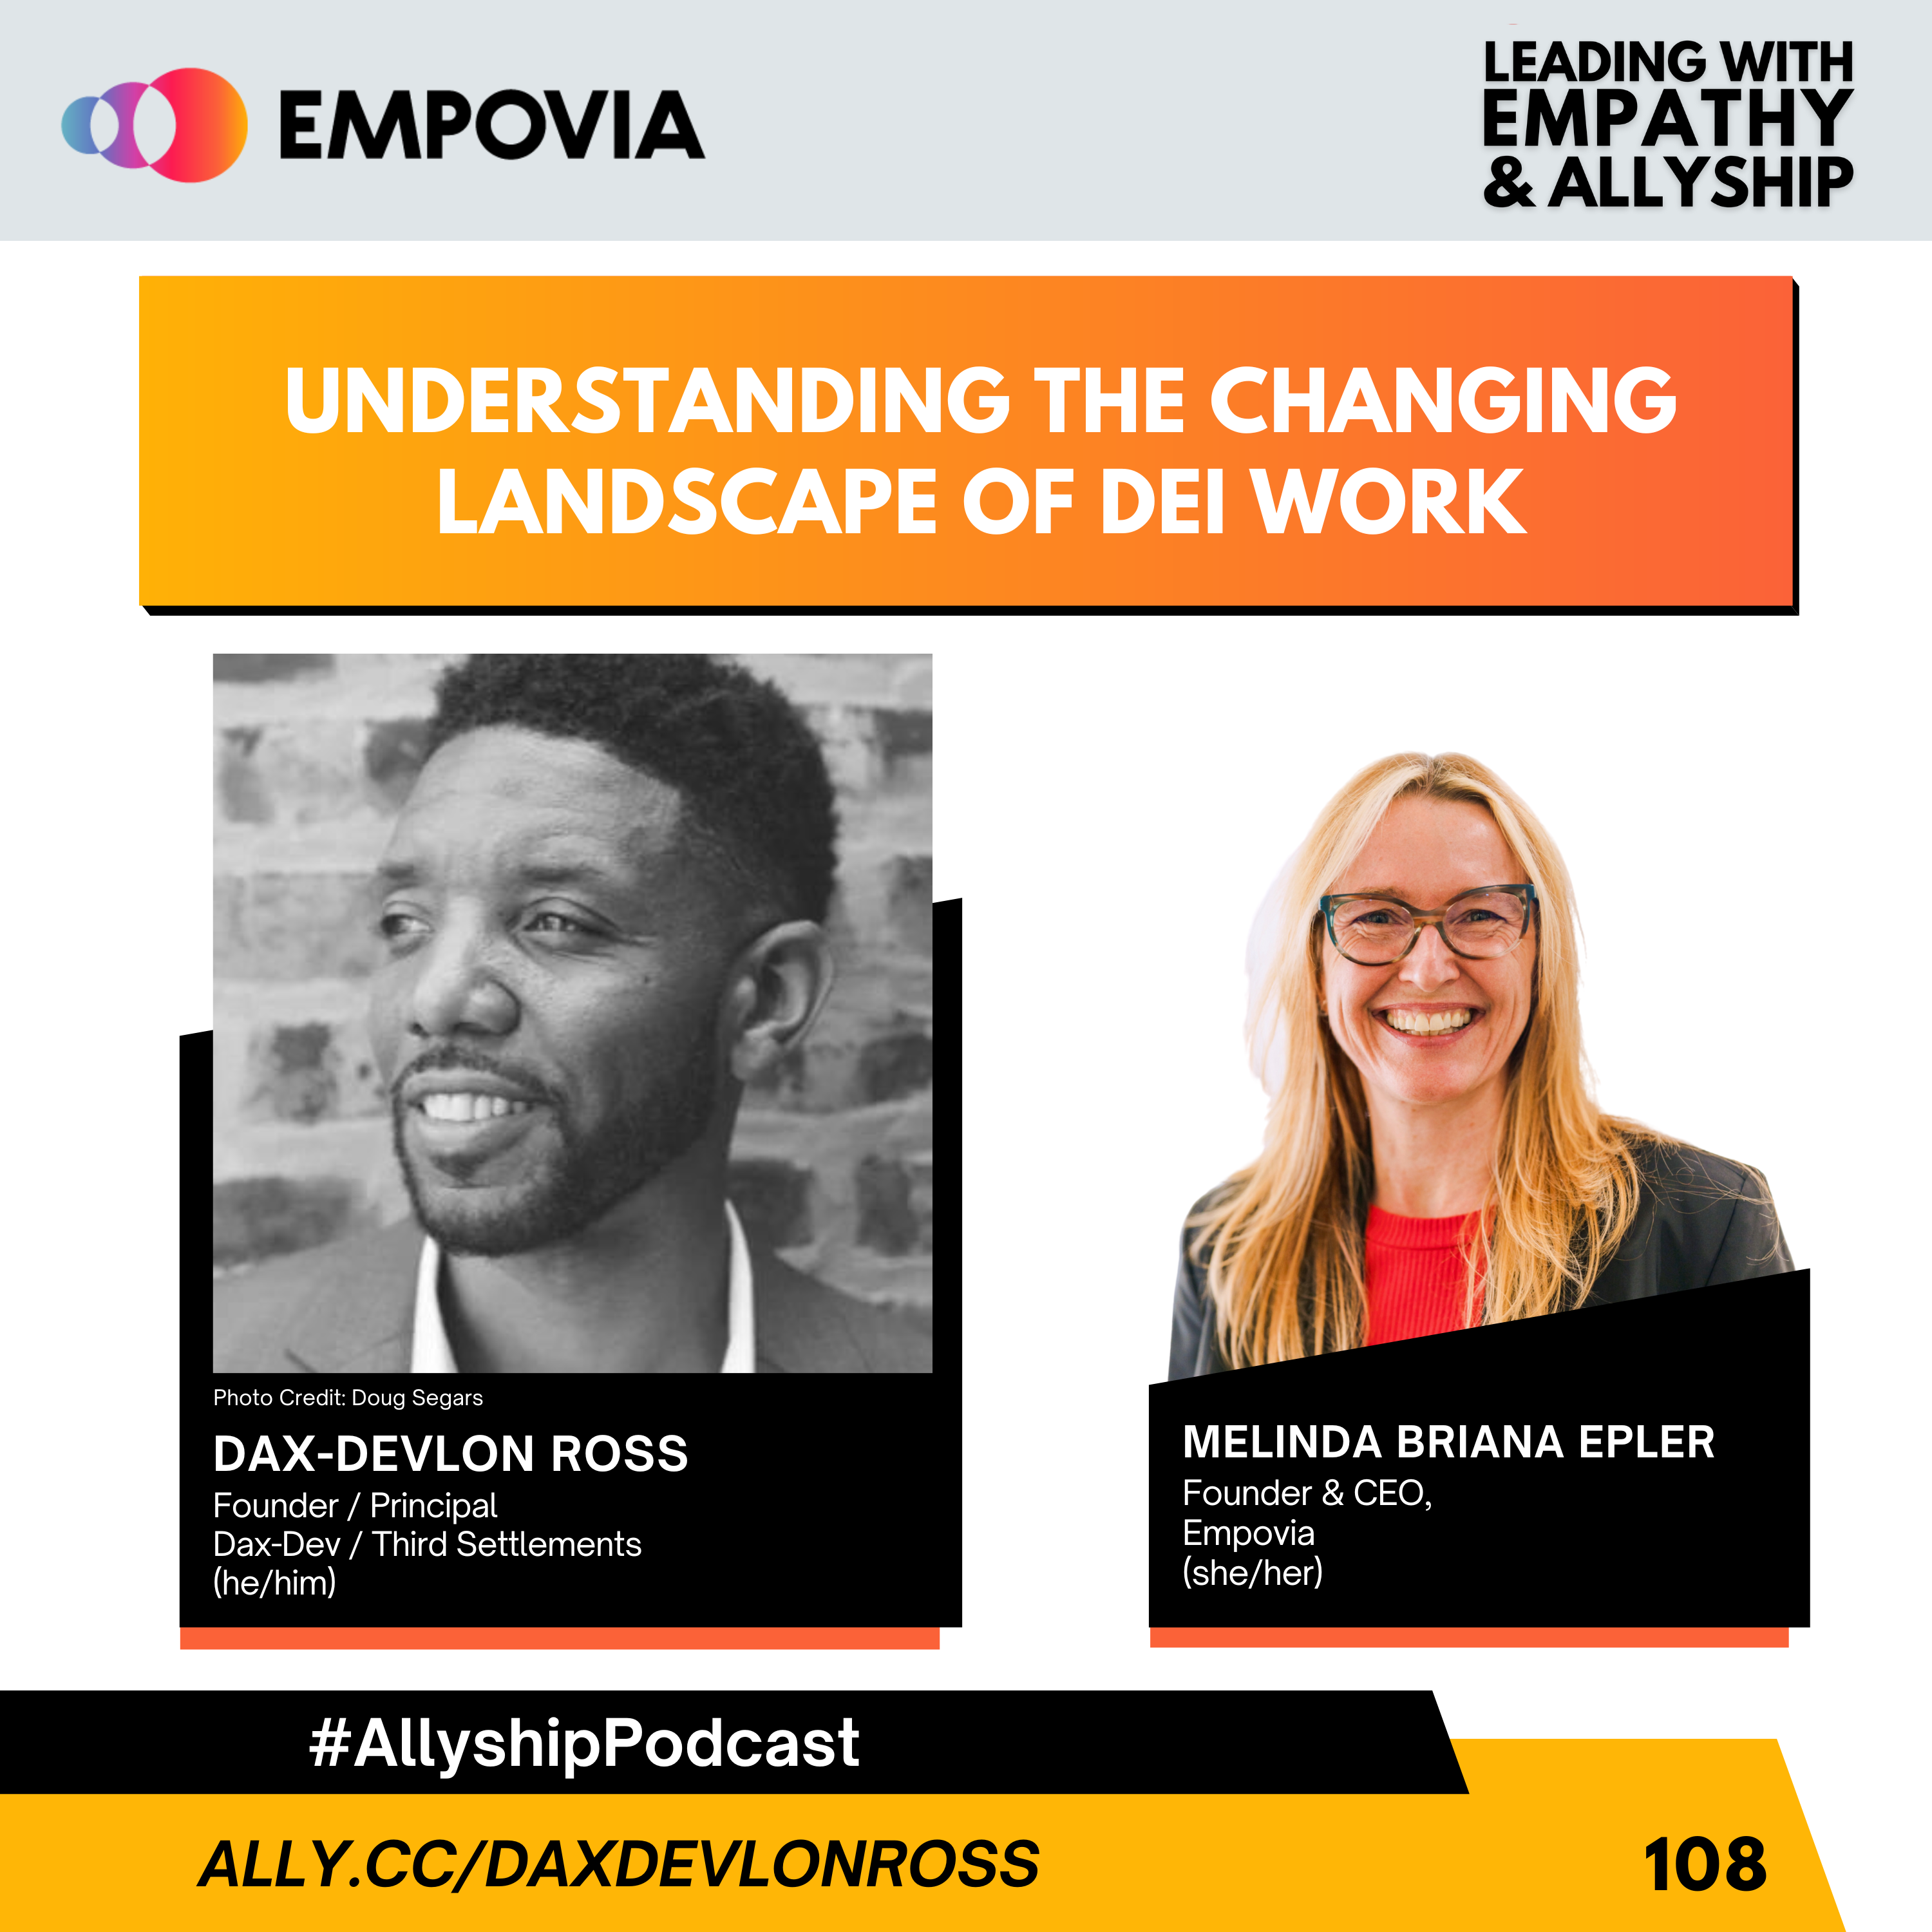 Leading With Empathy & Allyship promo and photos of Dax-Devlon Ross, an African-American man with black hair and facial hair, white button down, and grey suit; his black and white image has a photo credits to Doug Segars; and host Melinda Briana Epler, a White woman with blonde and red hair, glasses, red shirt, and black jacket.